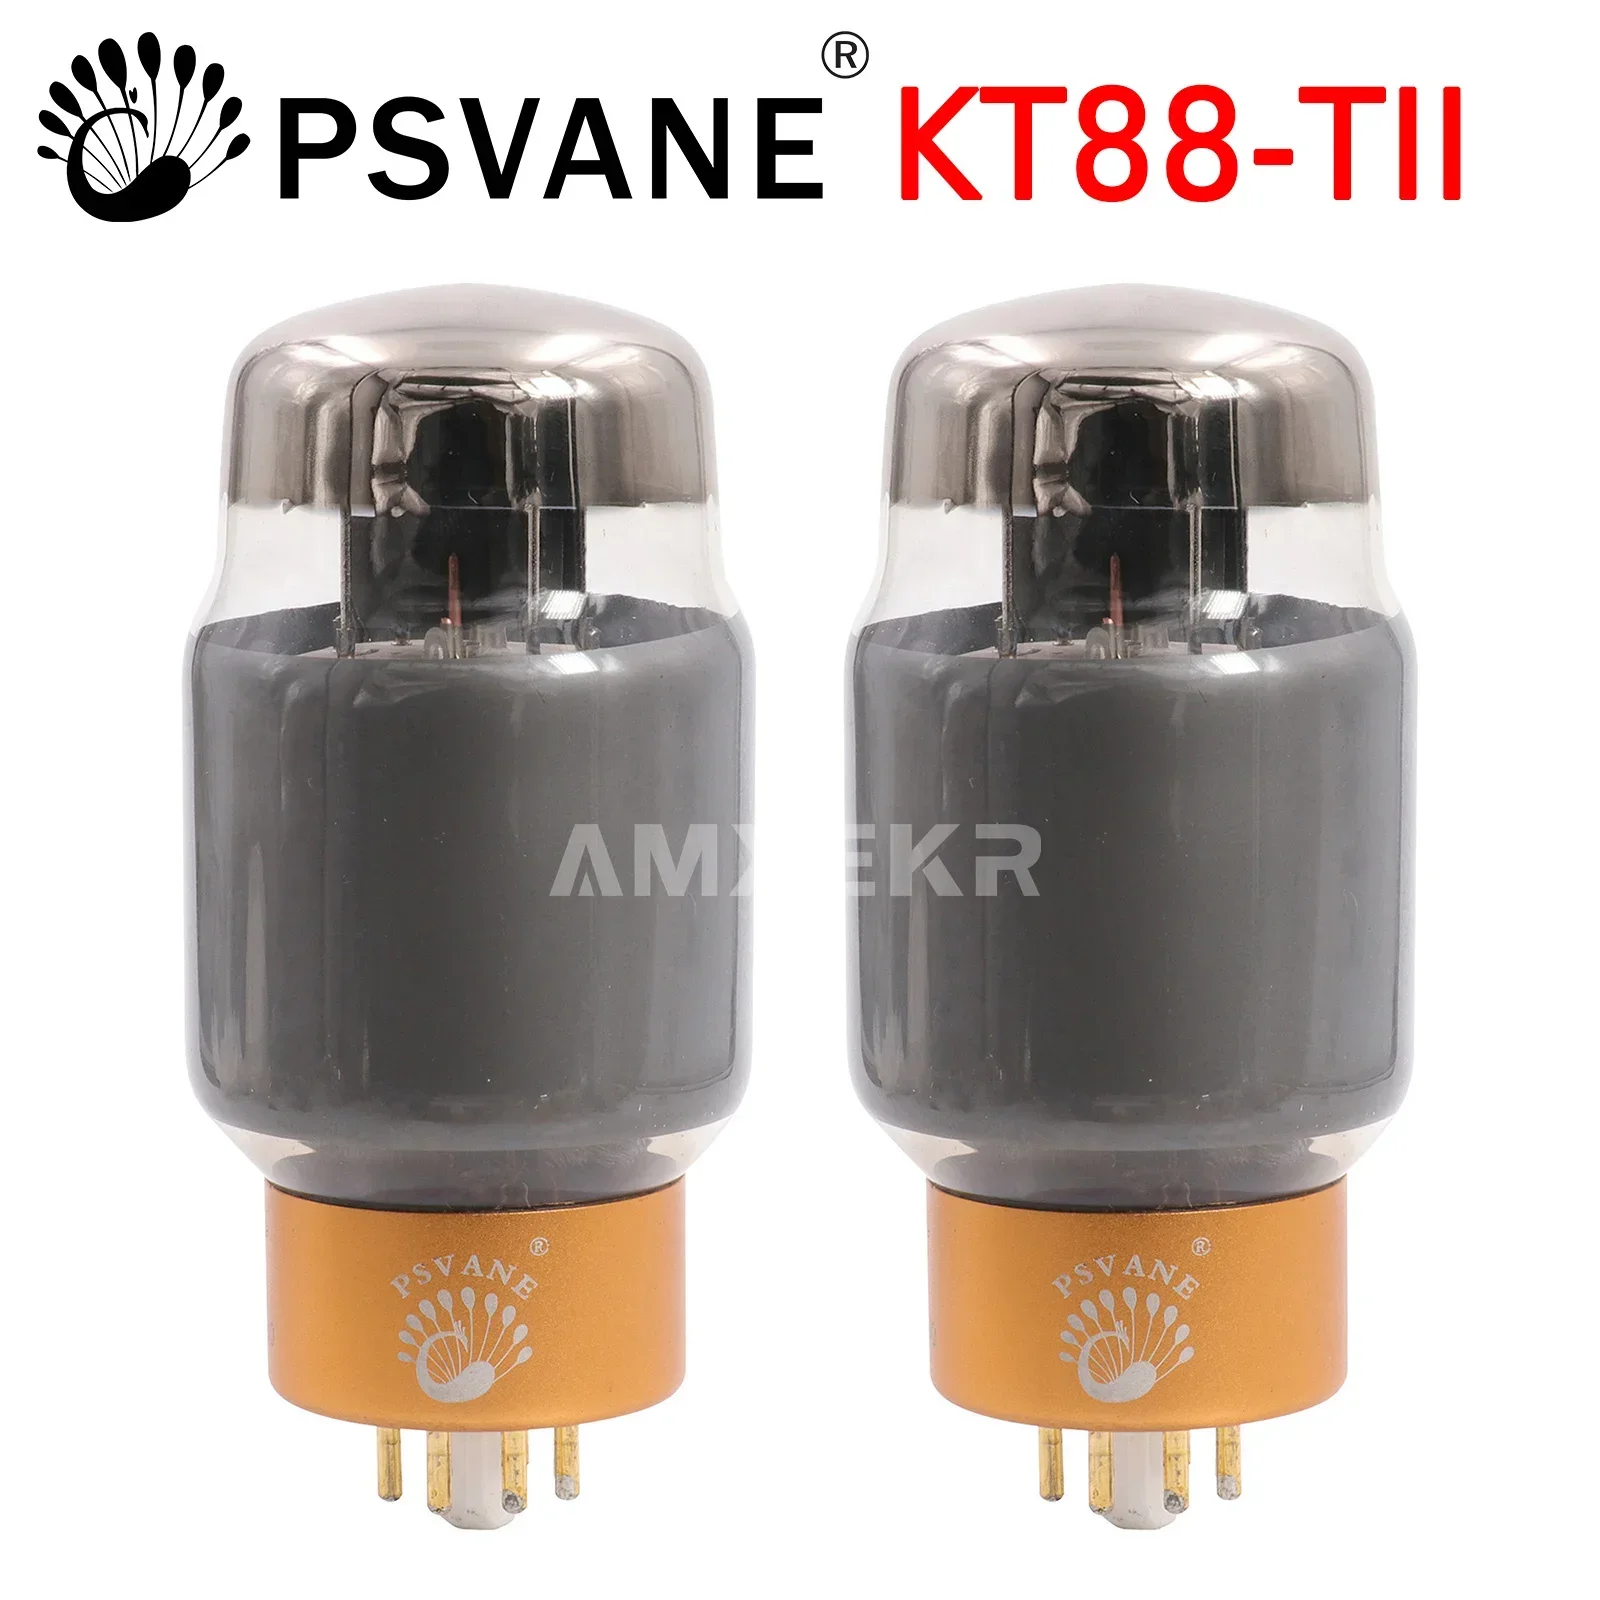 

PSVANE Tube KT88-TII Collector's Edition Replace CV5220 6550 Factory Matching Pair for Vacuum Tube Amplifier HIFI Amplifier